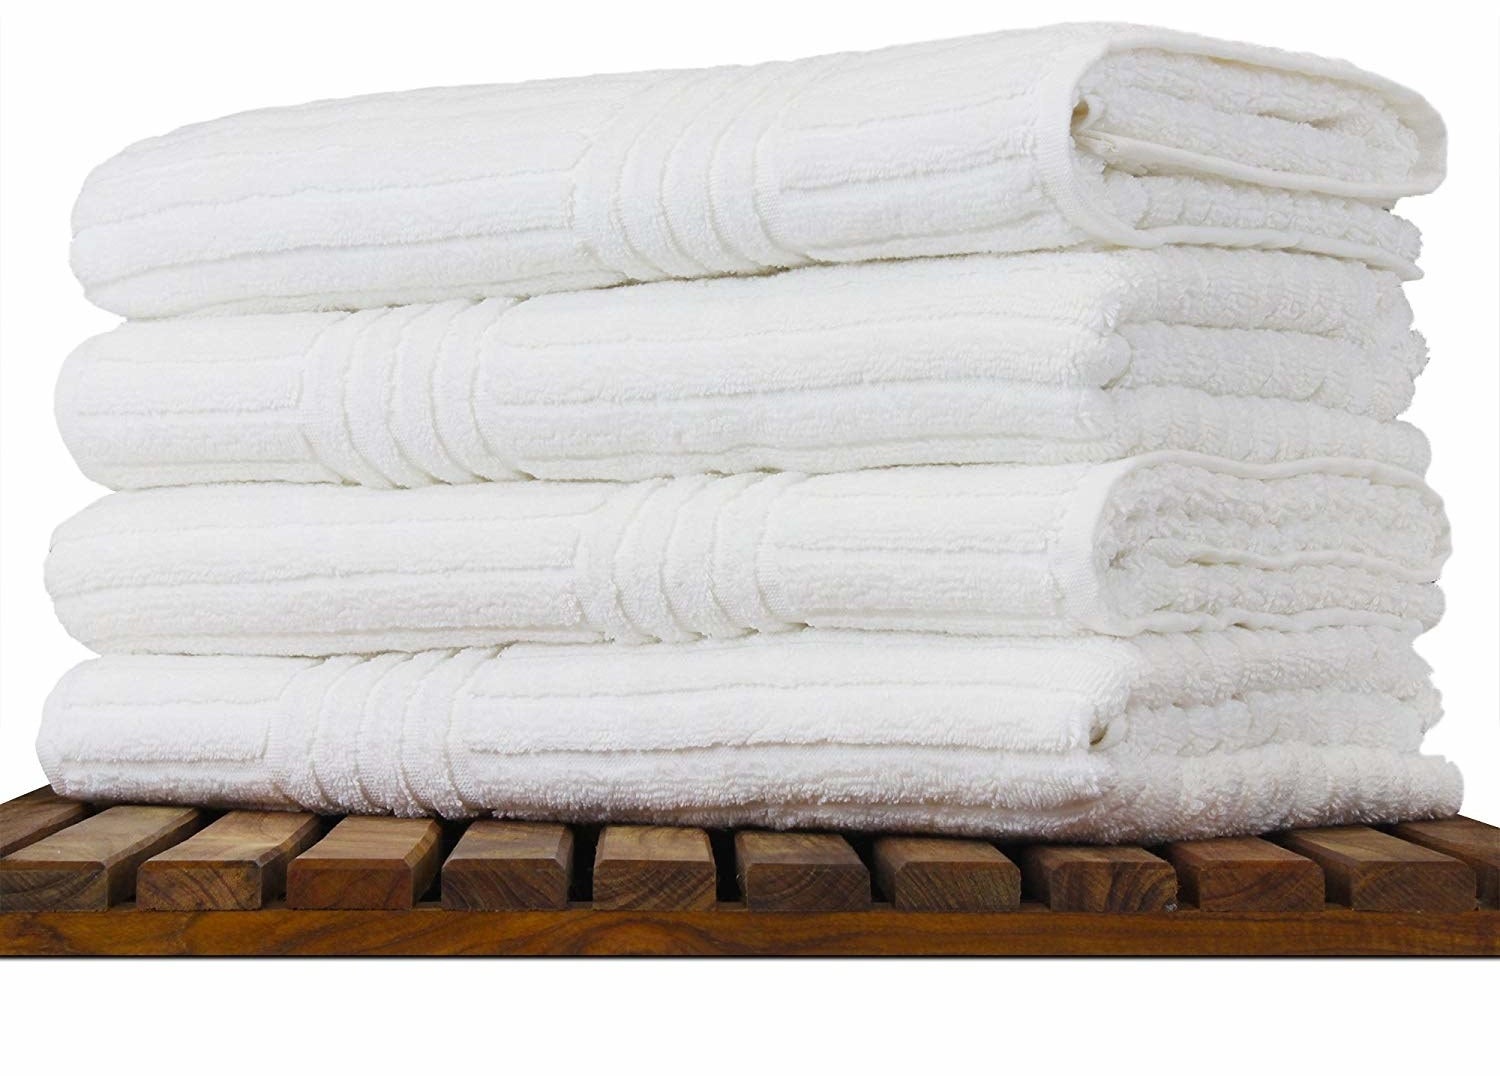 The stack of white textured towels